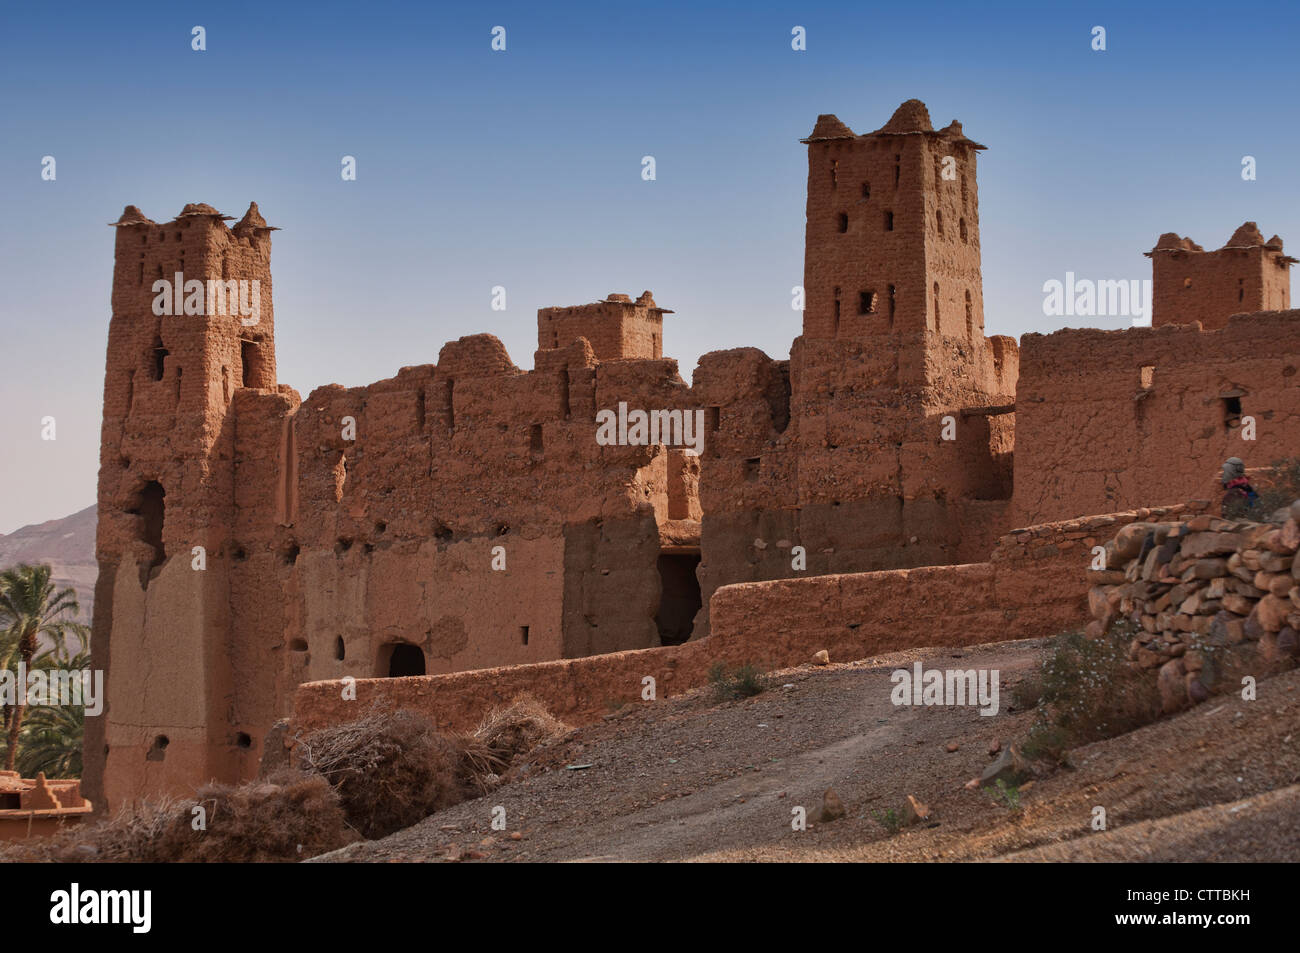 the ancient kasbah of N'Kobs in the Draa Valley, Morocco Stock Photo